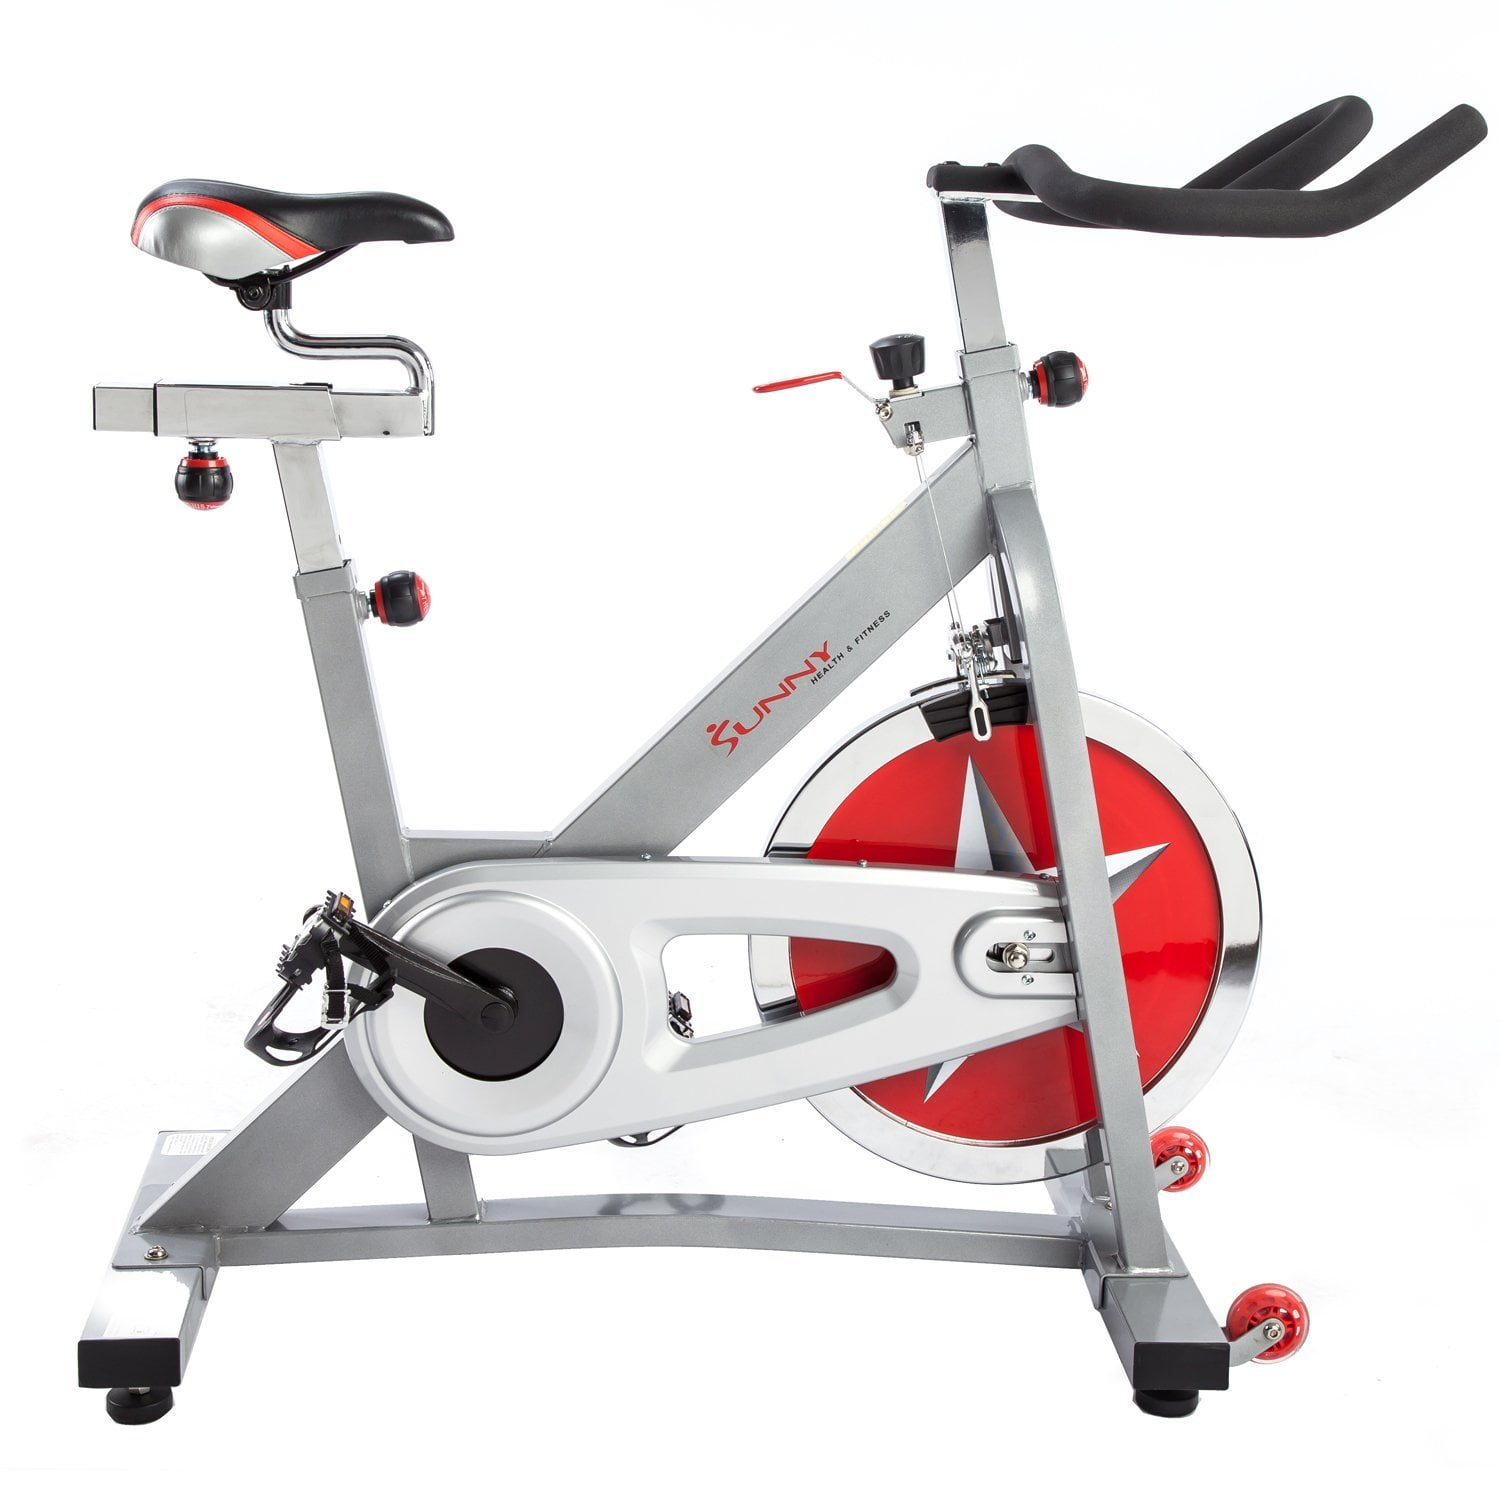 Spin Cycle Insurance, group fitness insurance, spin cycle instructor insurance